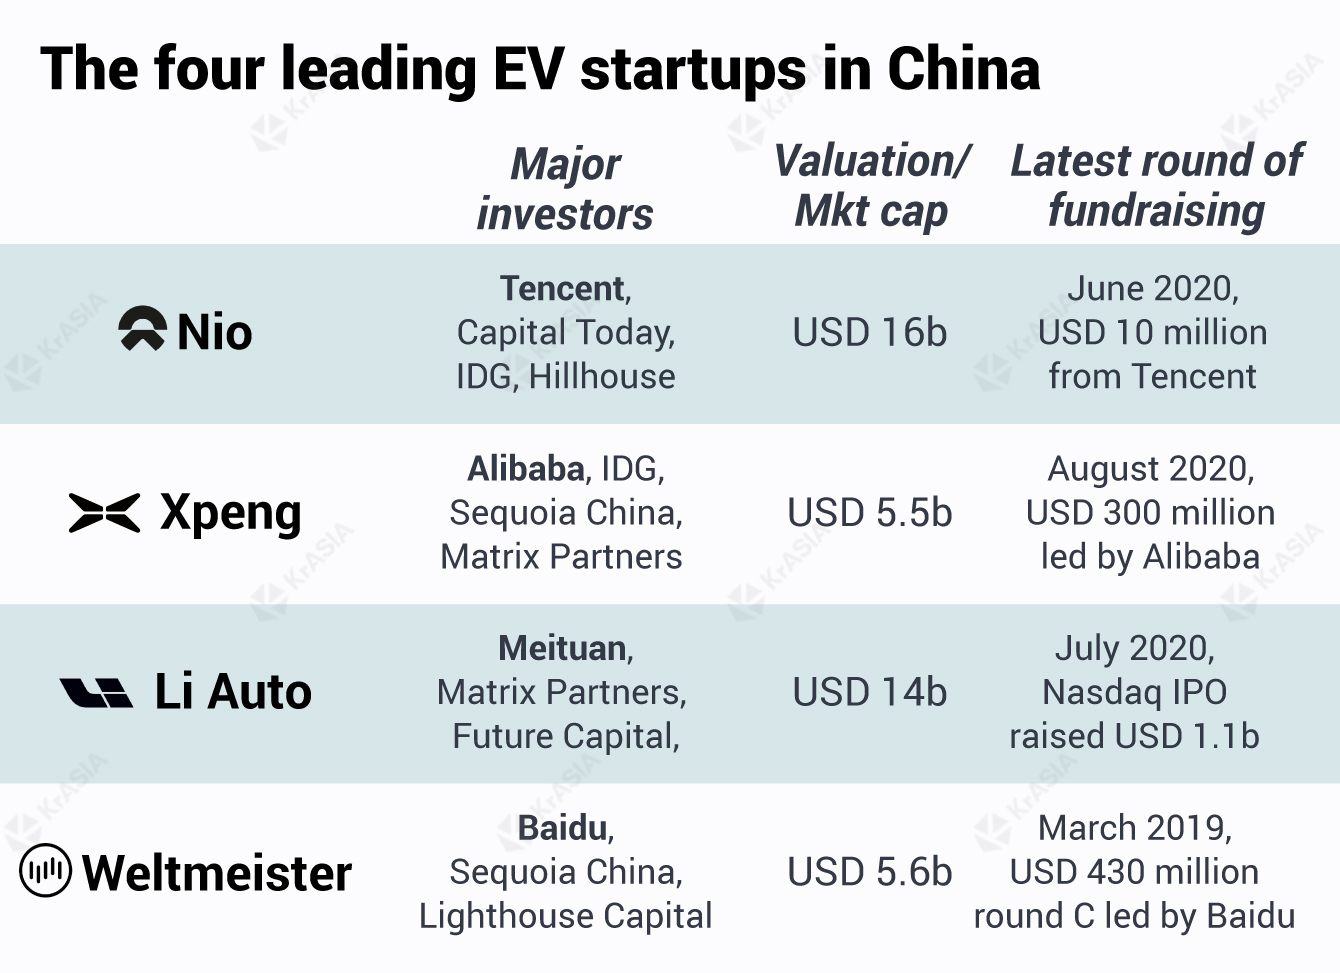 The four leading EV startups in China: Nio, Xpeng, Li Auto and Weltmeister